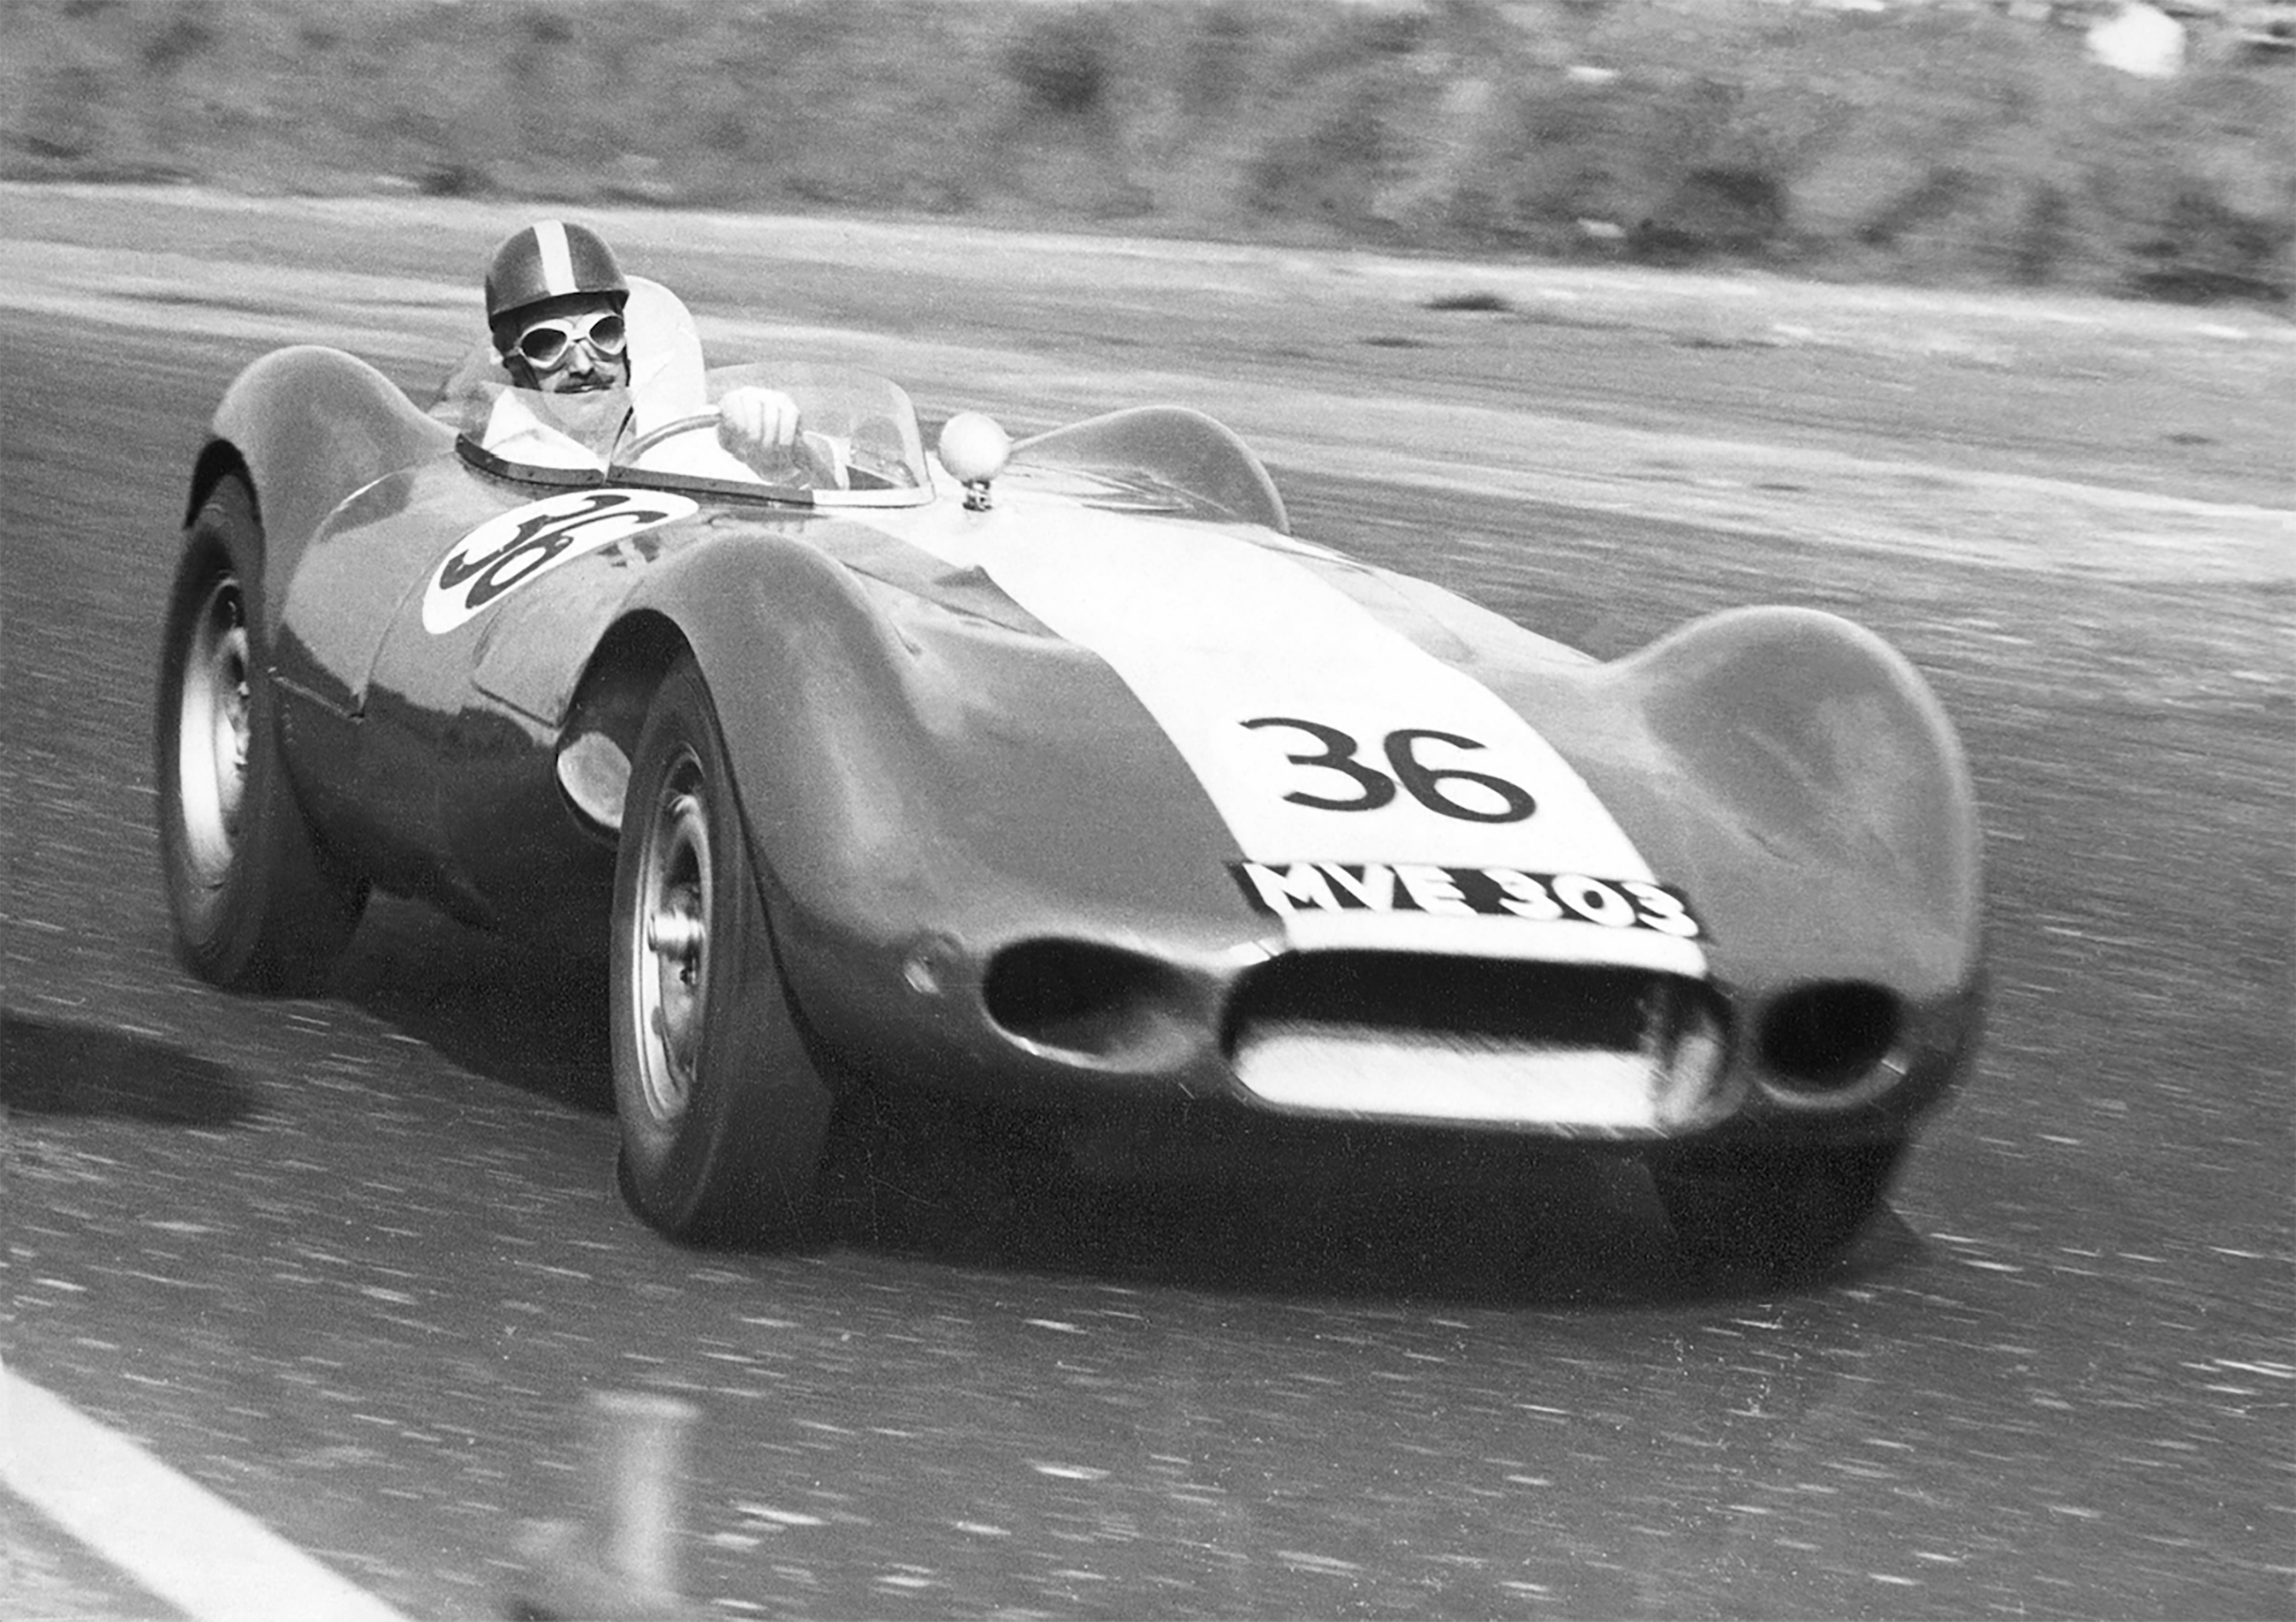 Archie Scott Brown in the 1957 works prototype Lister-Jaguar ‘MVE 303’ - more or less straight, just for once...